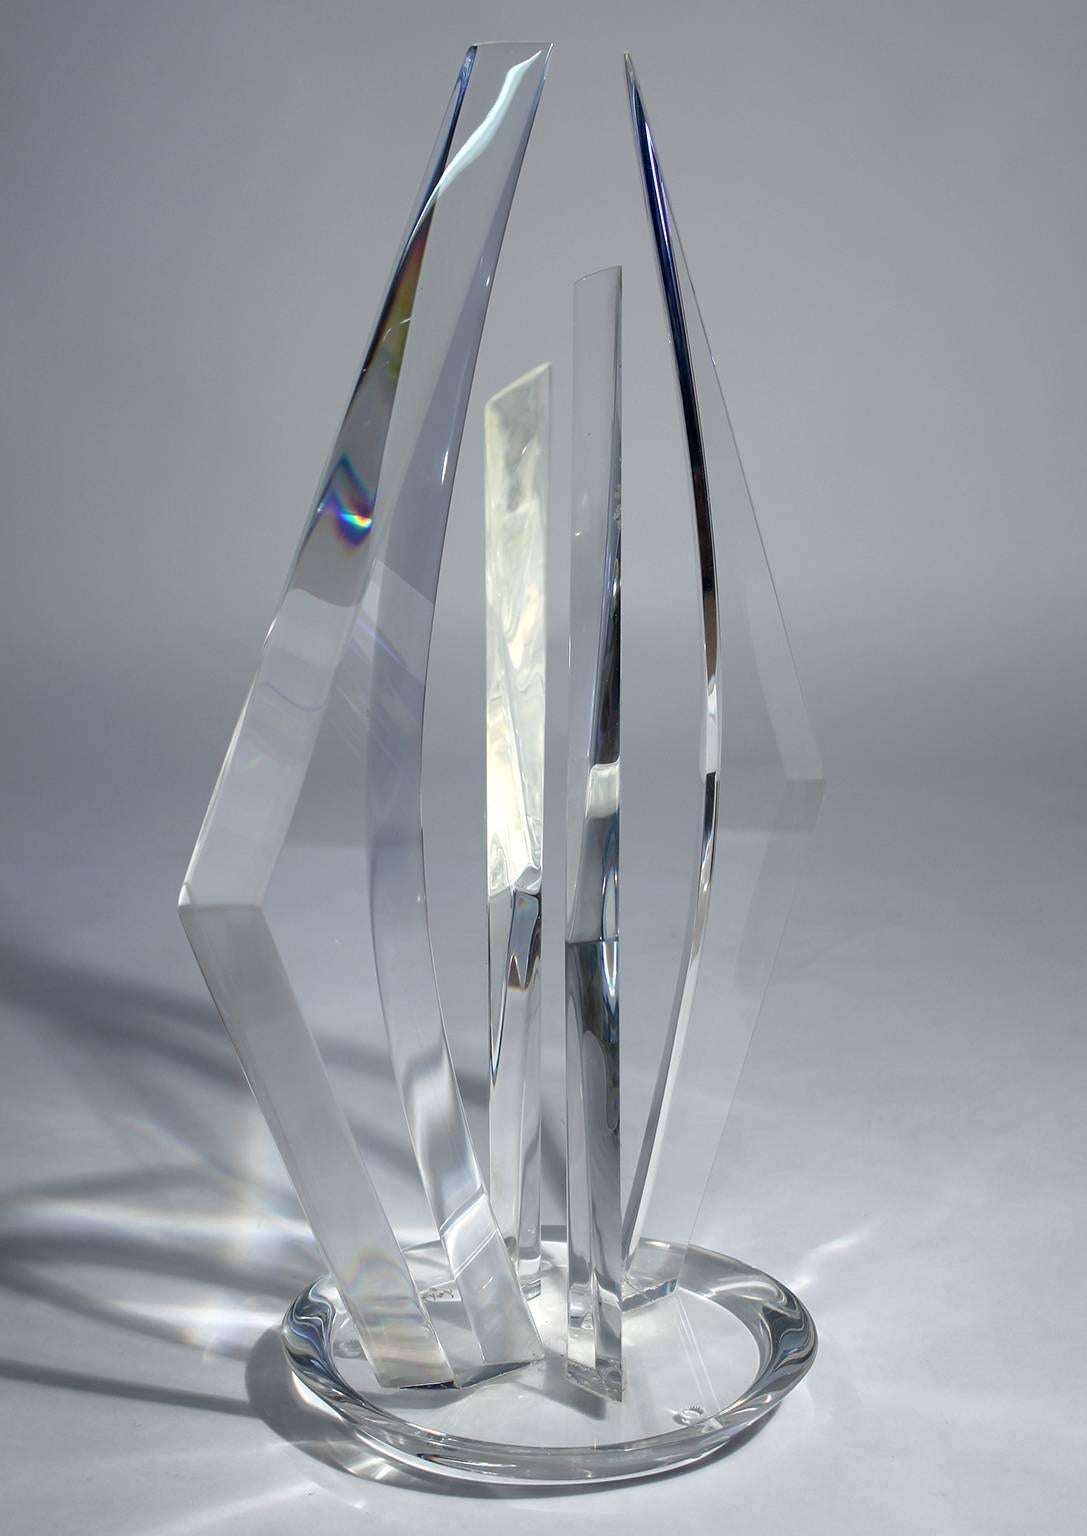 Large abstract Lucite sculpture by Hivo Van Teal. Signed on the base. Minor edge chip located on the inside of one of the pieces.